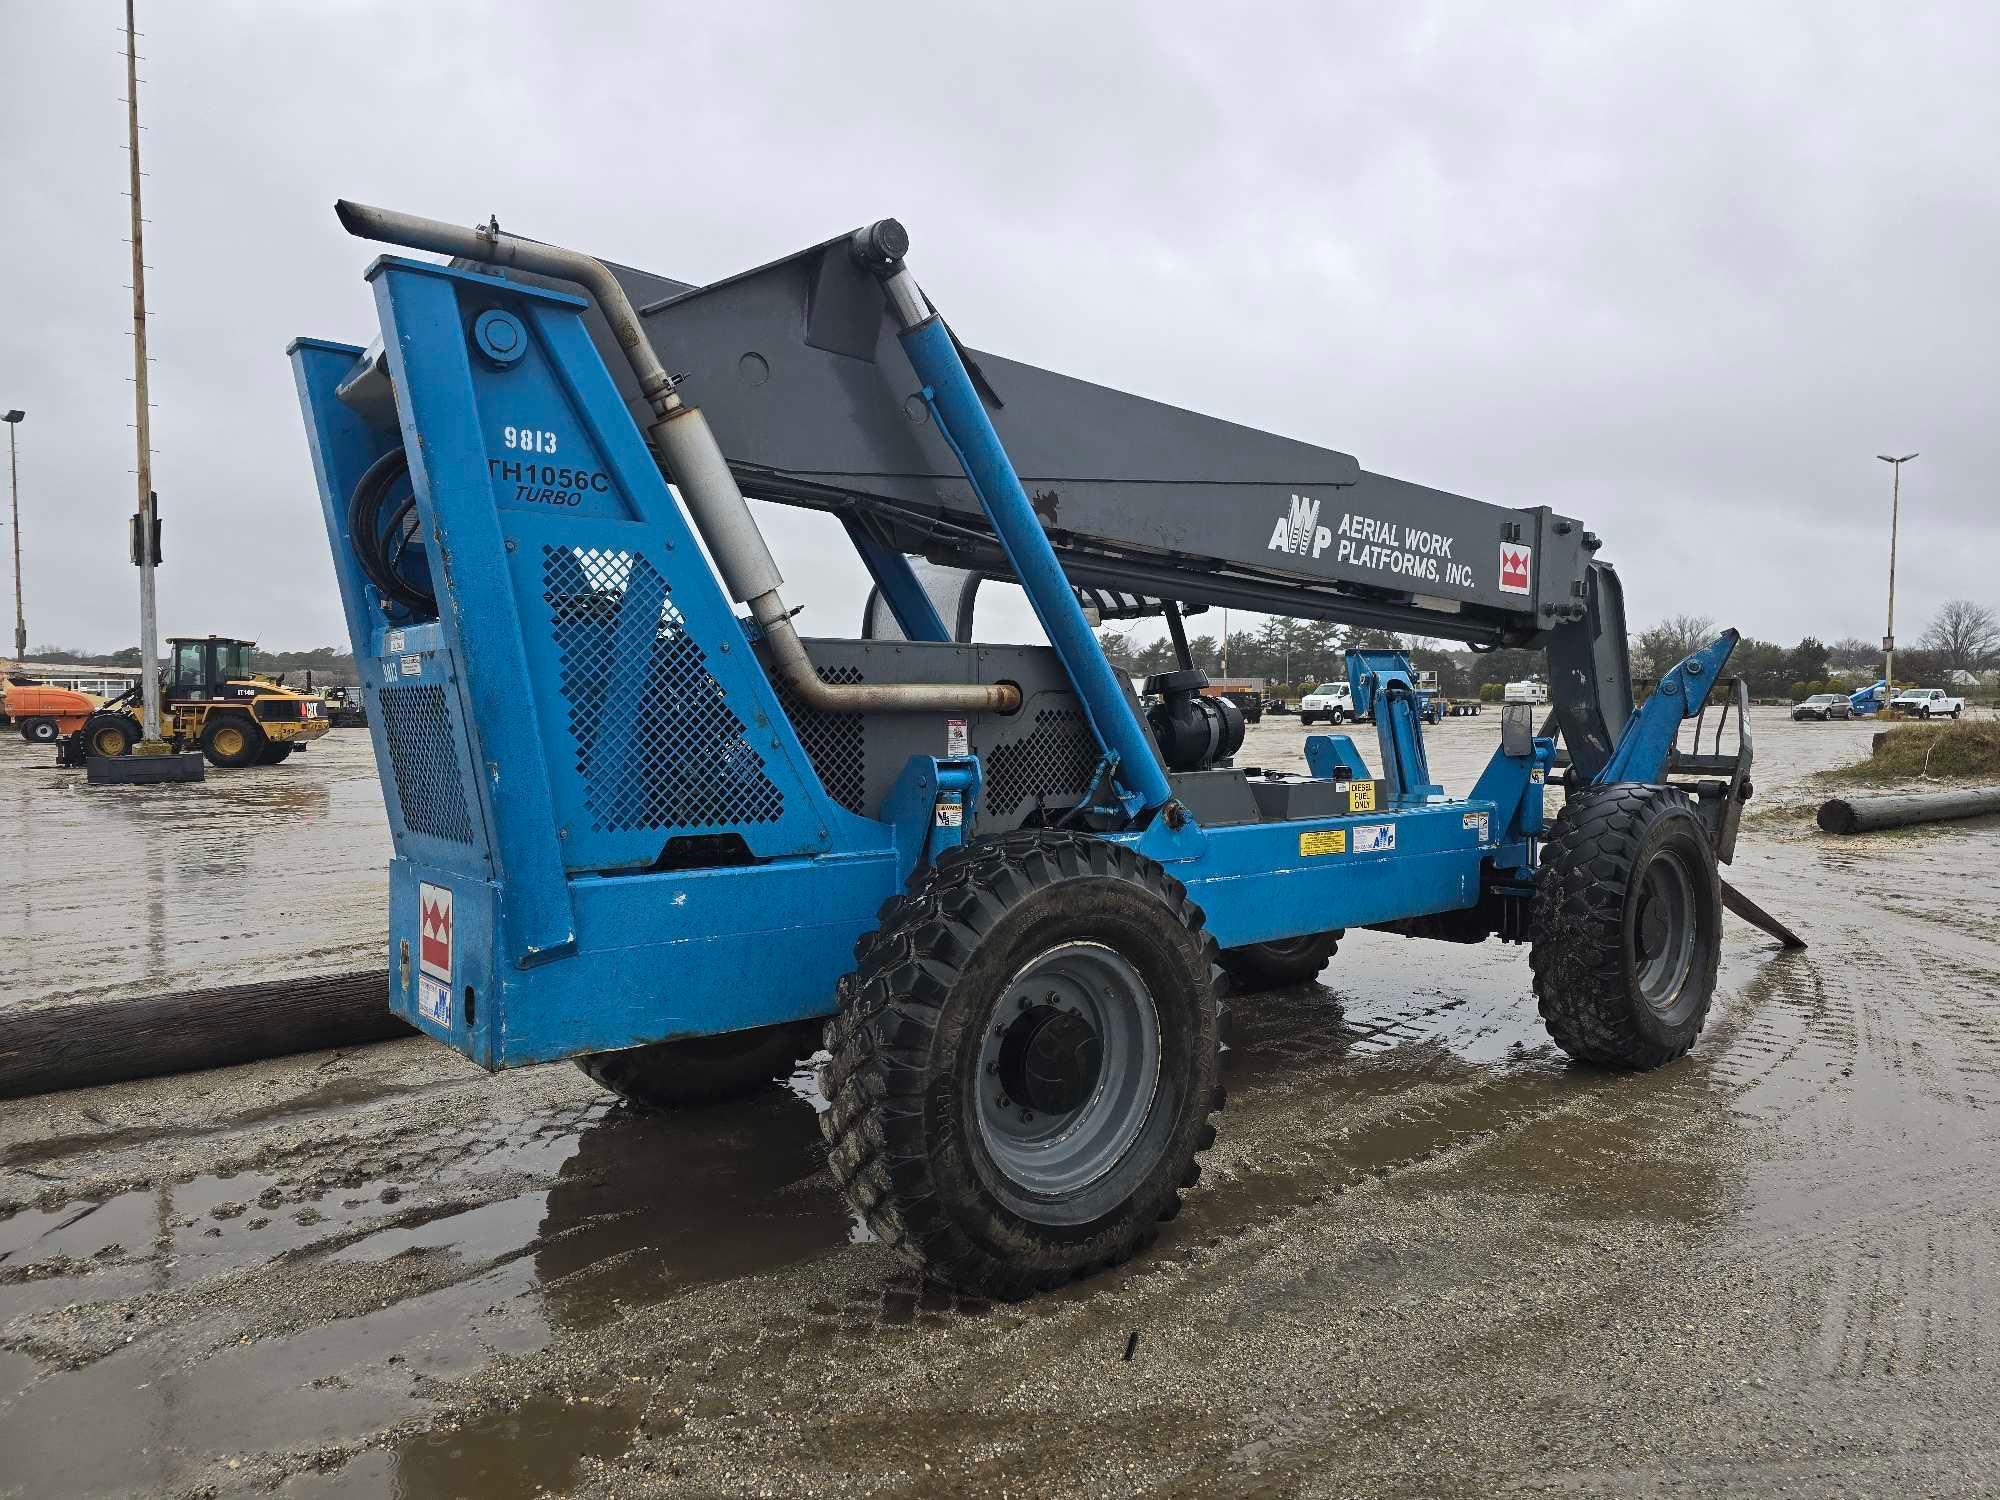 GENIE GTH1056C TELESCOPIC FORKLIFT SN:A9813 4x4, powered by diesel engine, equipped with OROPS,